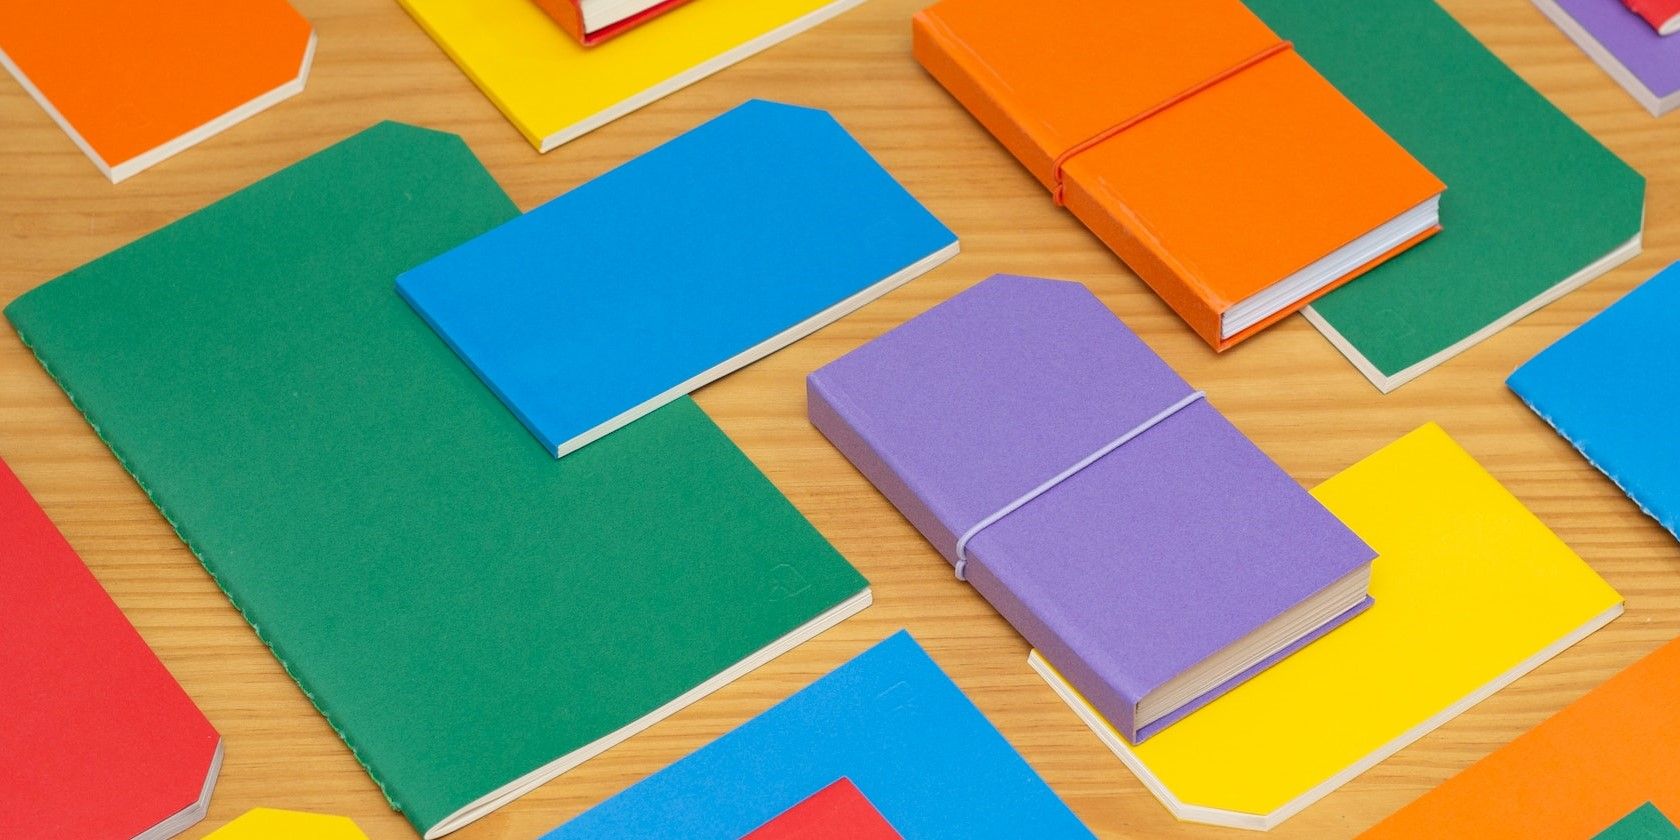 Folders of Different Colors on a Table